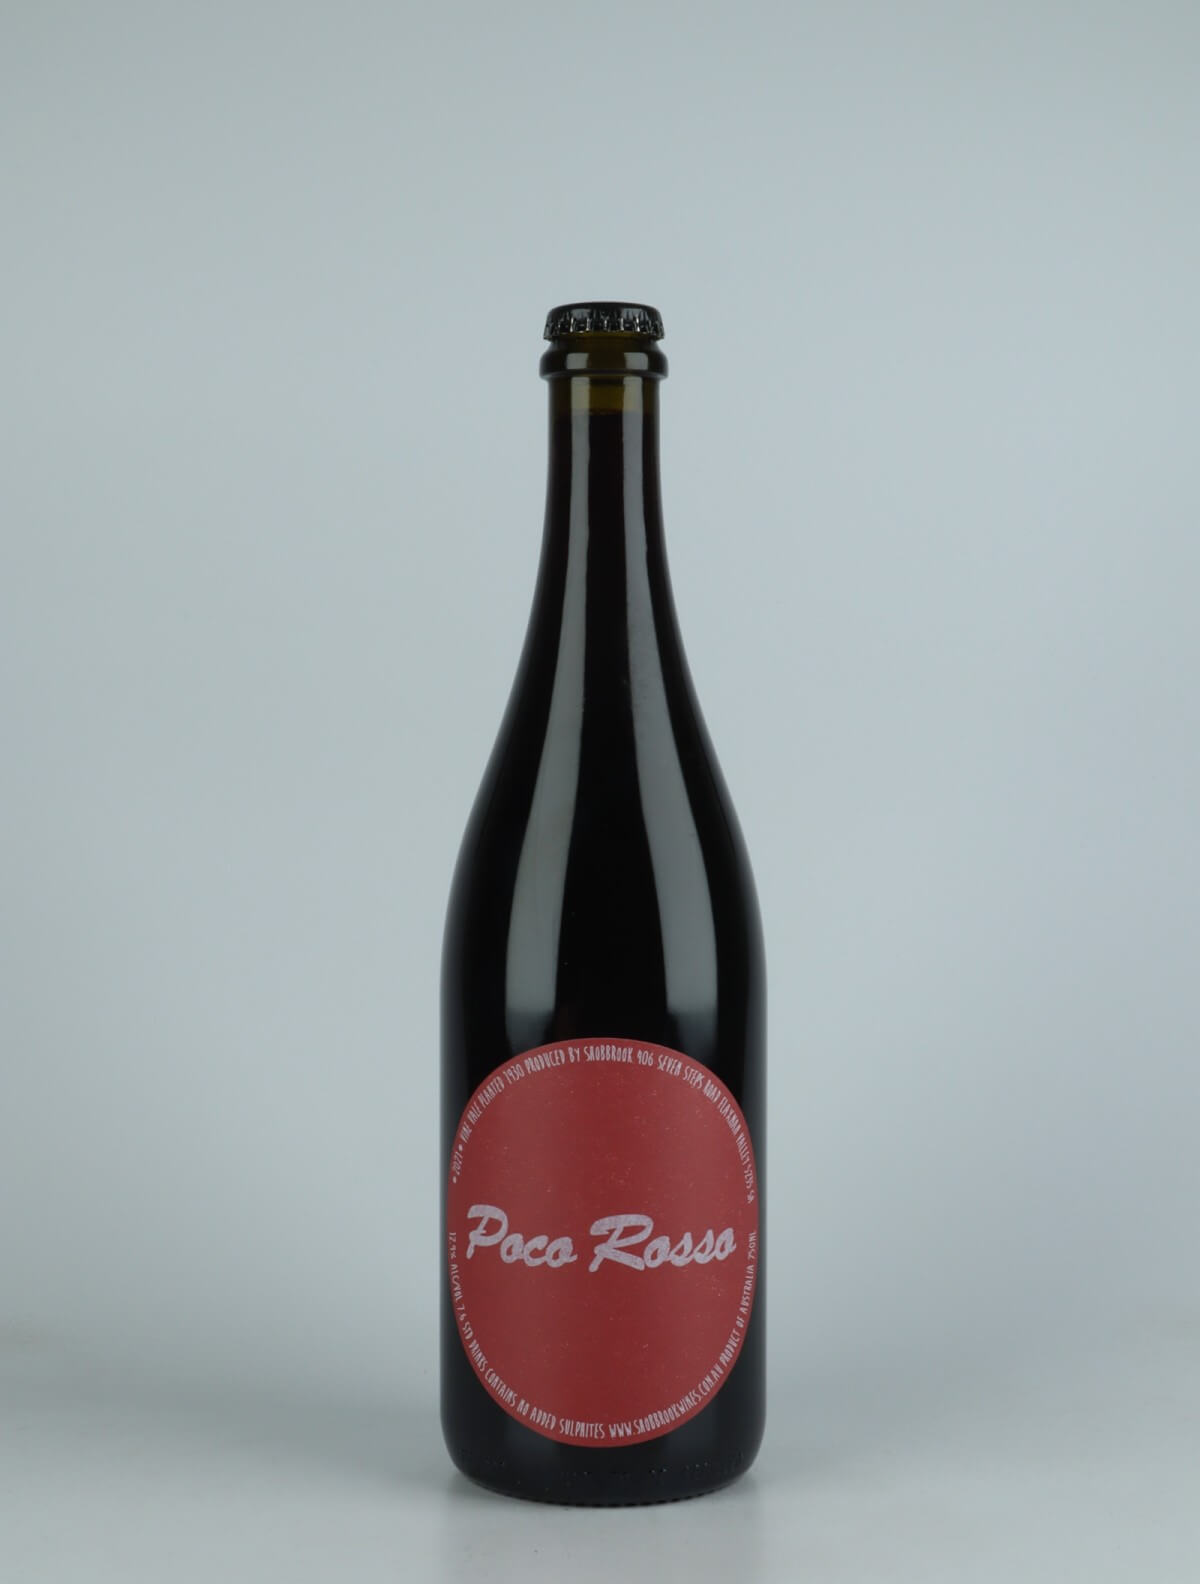 A bottle 2021 Poco Rosso Red wine from Tom Shobbrook, Barossa Valley in 